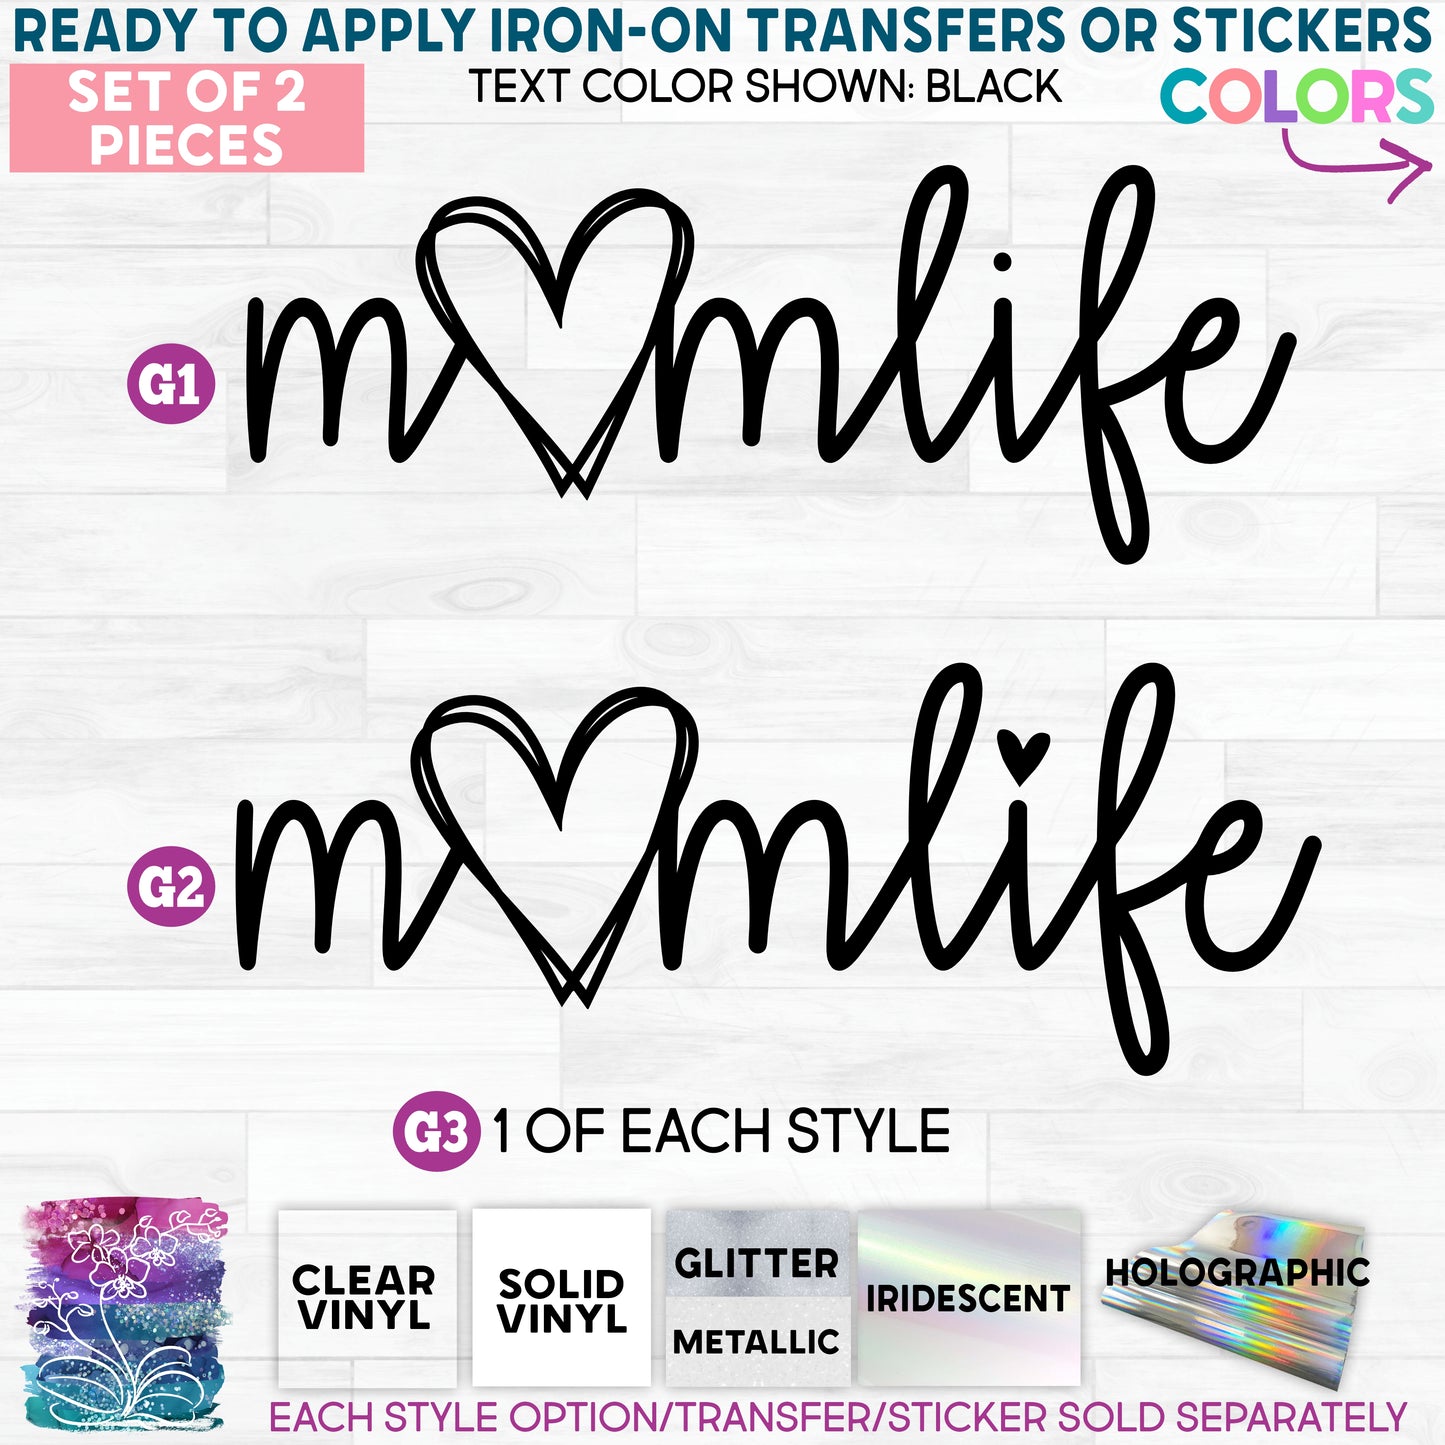 s294-G Momlife Made-to-Order Iron-On Transfer or Sticker